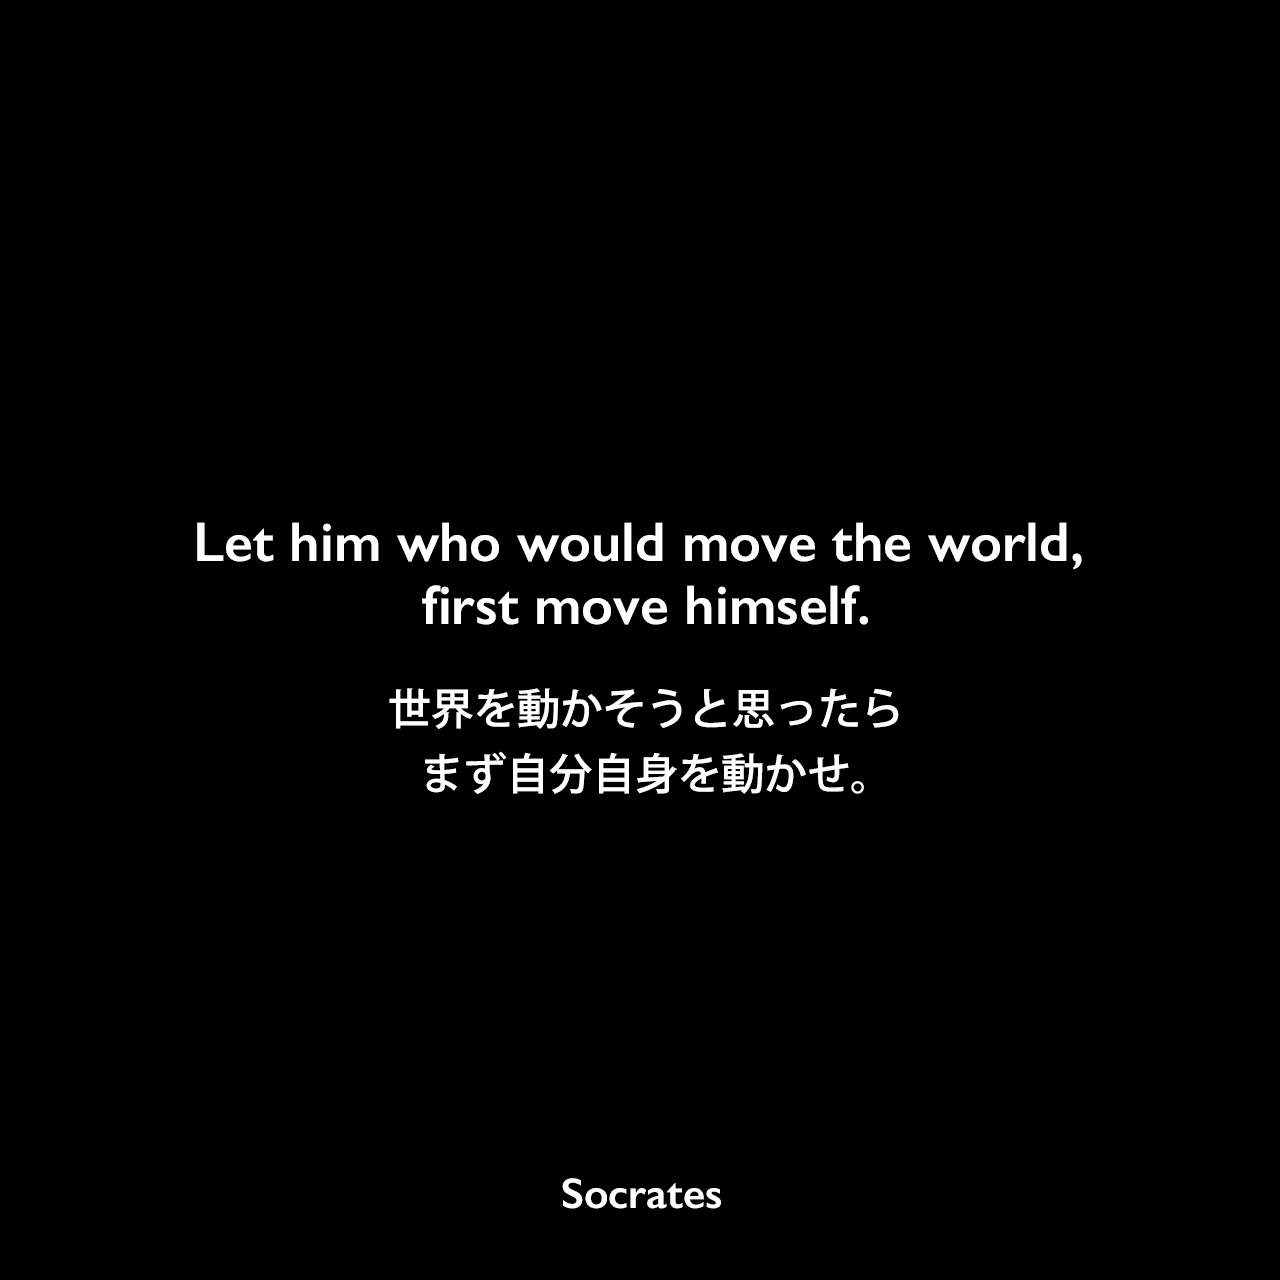 Let him who would move the world, first move himself.世界を動かそうと思ったら、まず自分自身を動かせ。